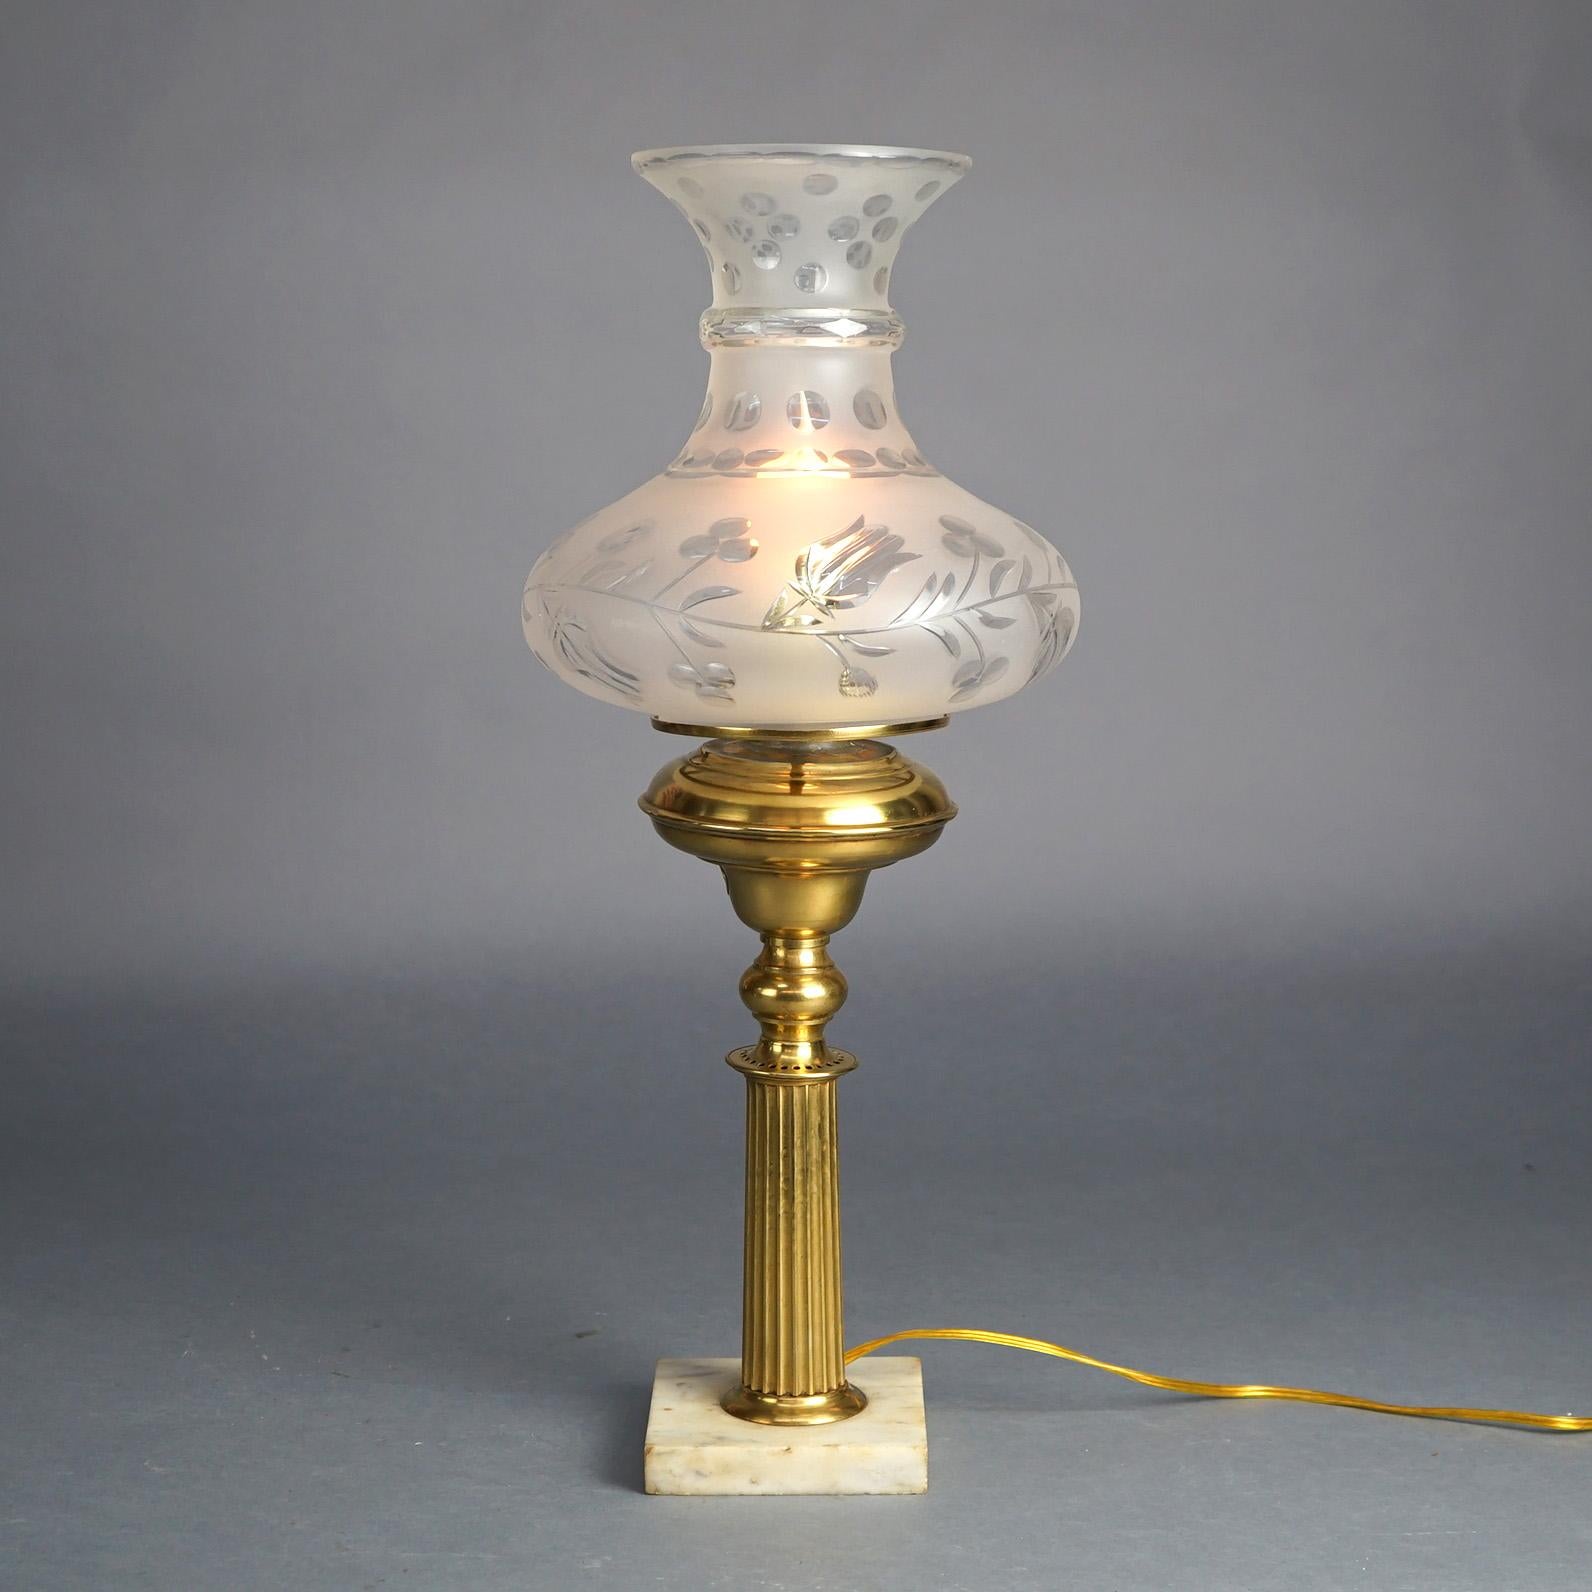 Antique Fluted Brass Solar Lamp with Tam-O-Shanter Floral Cut Glass Shade & Marble Base C1840

Measures- 23.5''H x 9.5''W x 9.5''D